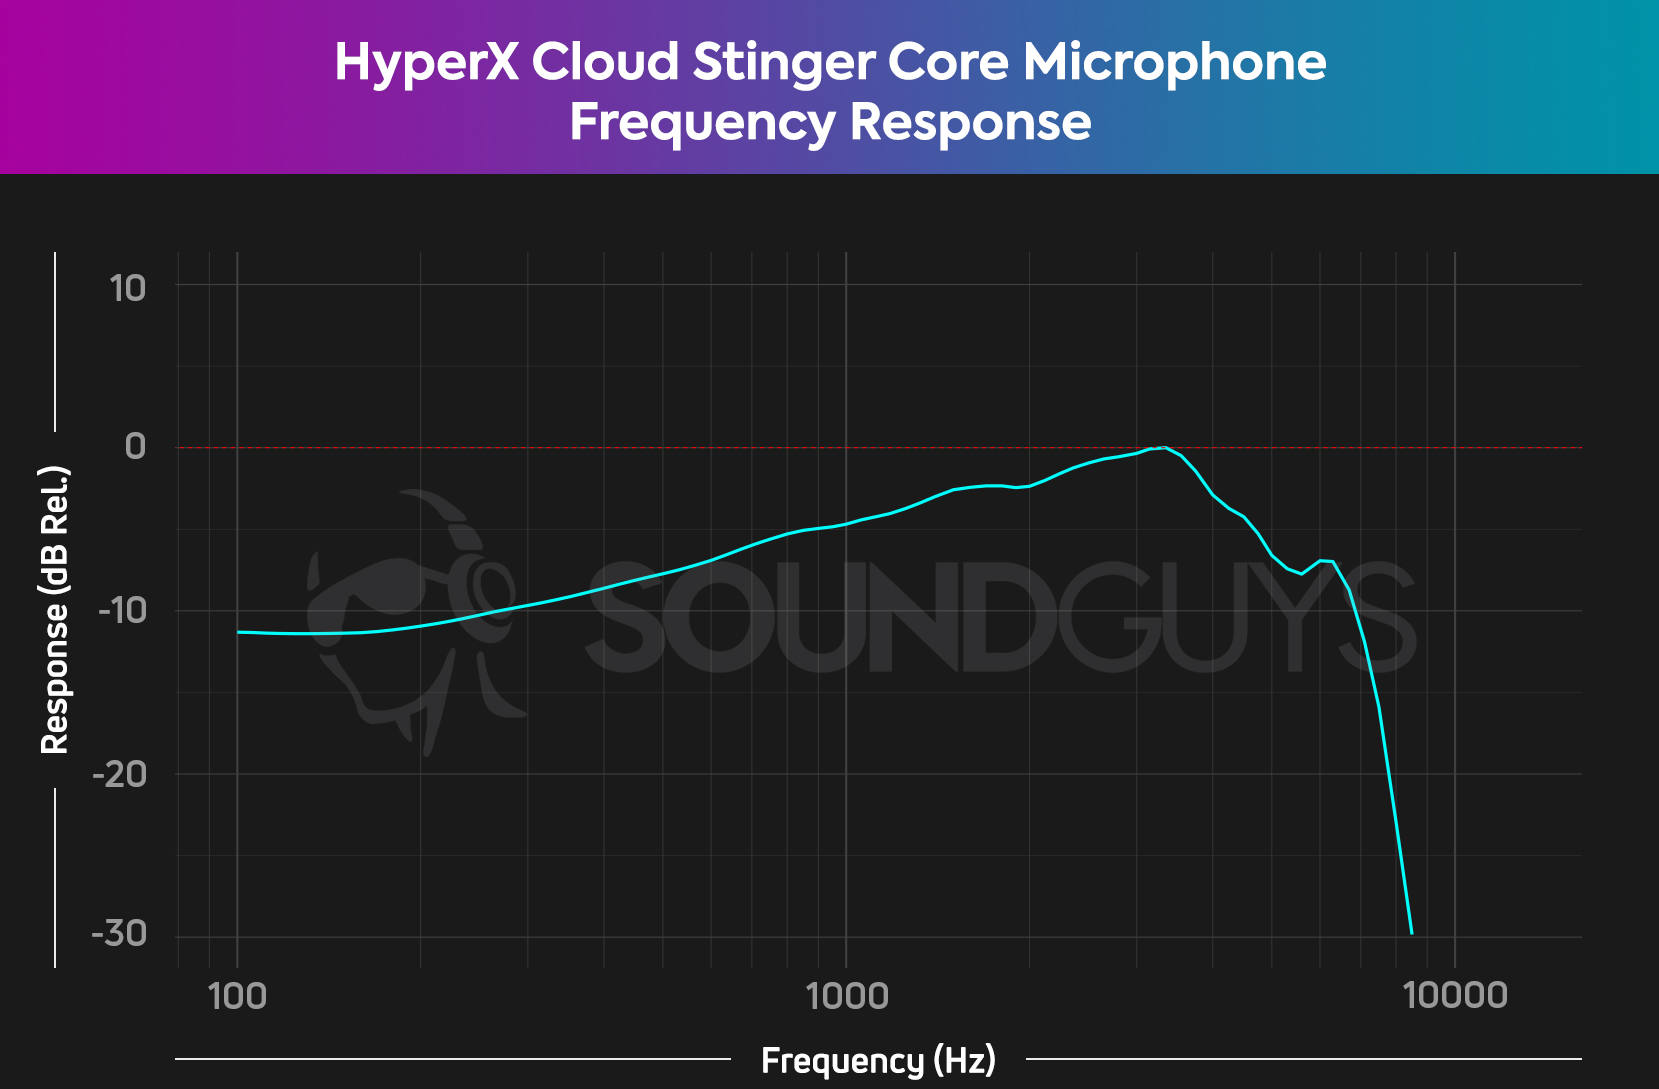 The microphone frequency response chart for the HyperX Cloud Stinger Core.